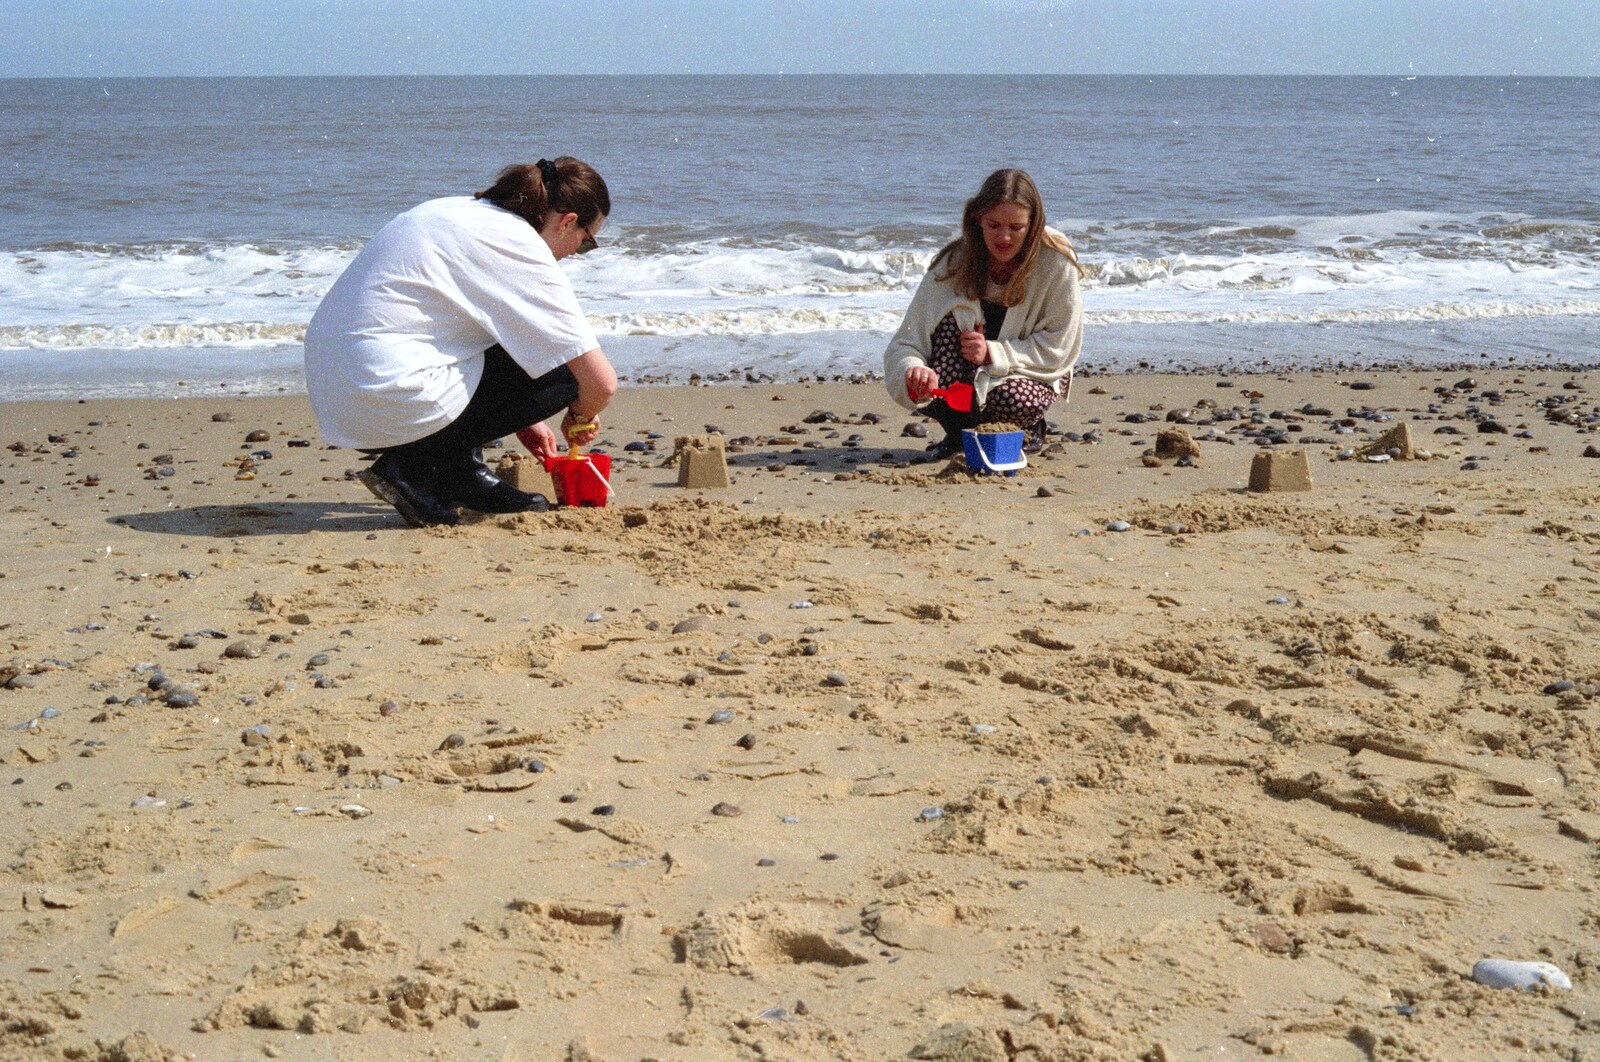 A Phil and Sean Weekend, and Bedroom Building, Brome, Norwich and Southwold - 18th April 1995: Building sandcastles